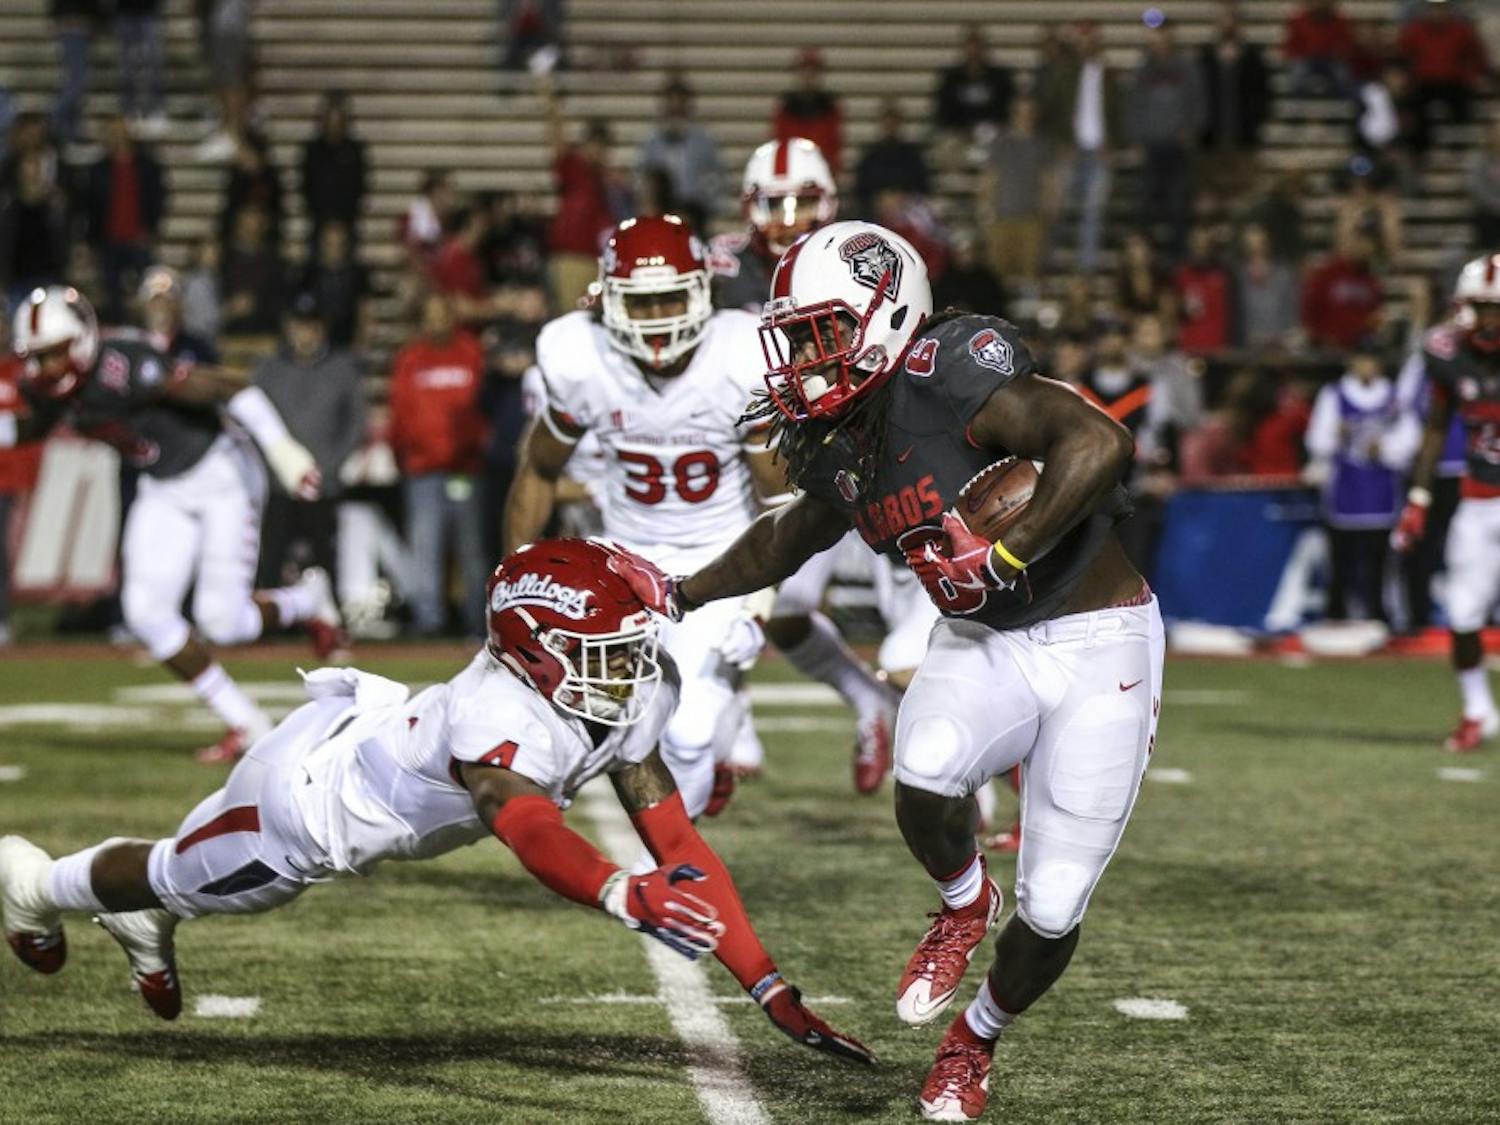 De’John Rogers (#6) stiff-arms an on-coming tackler from Fresno State during Saturday’s game. UNM was defeated 38-7. &nbsp;